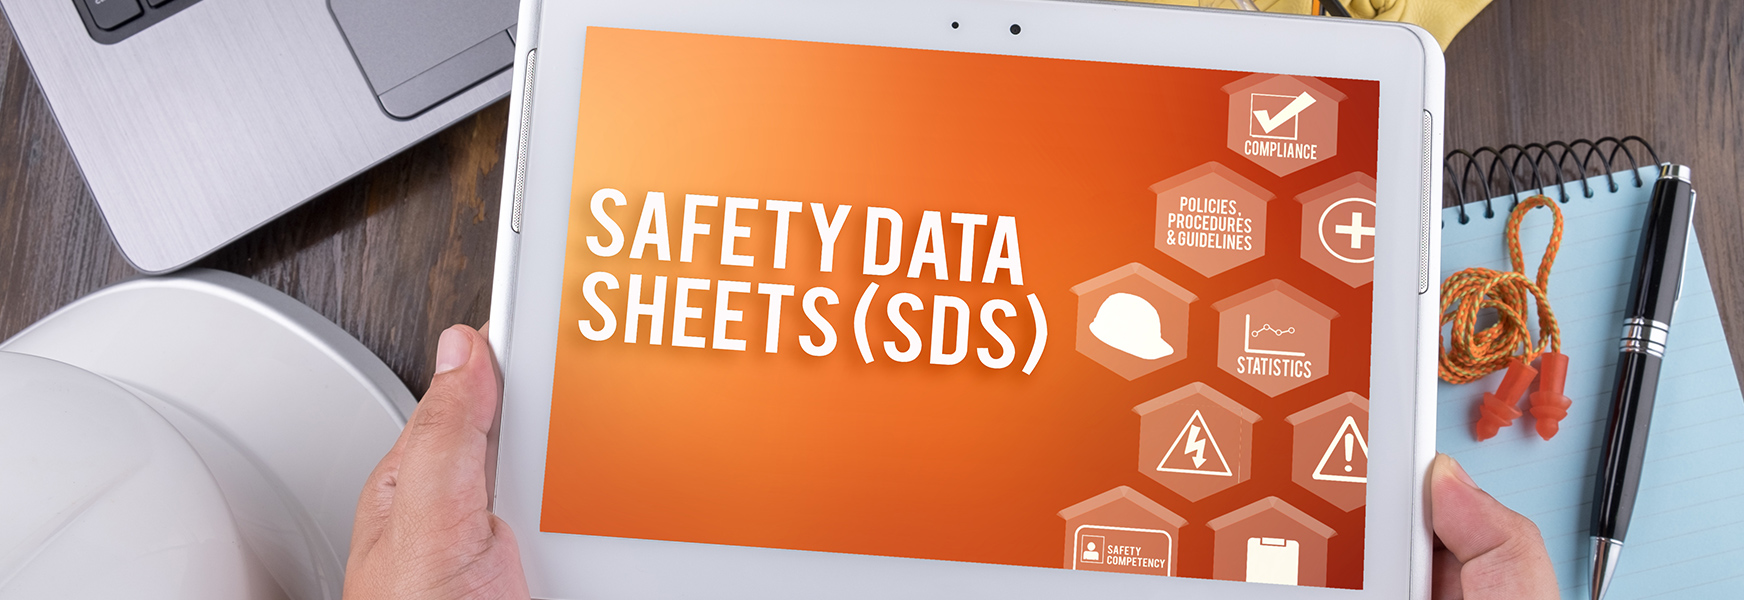 Safety Data Sheet shown on tablet